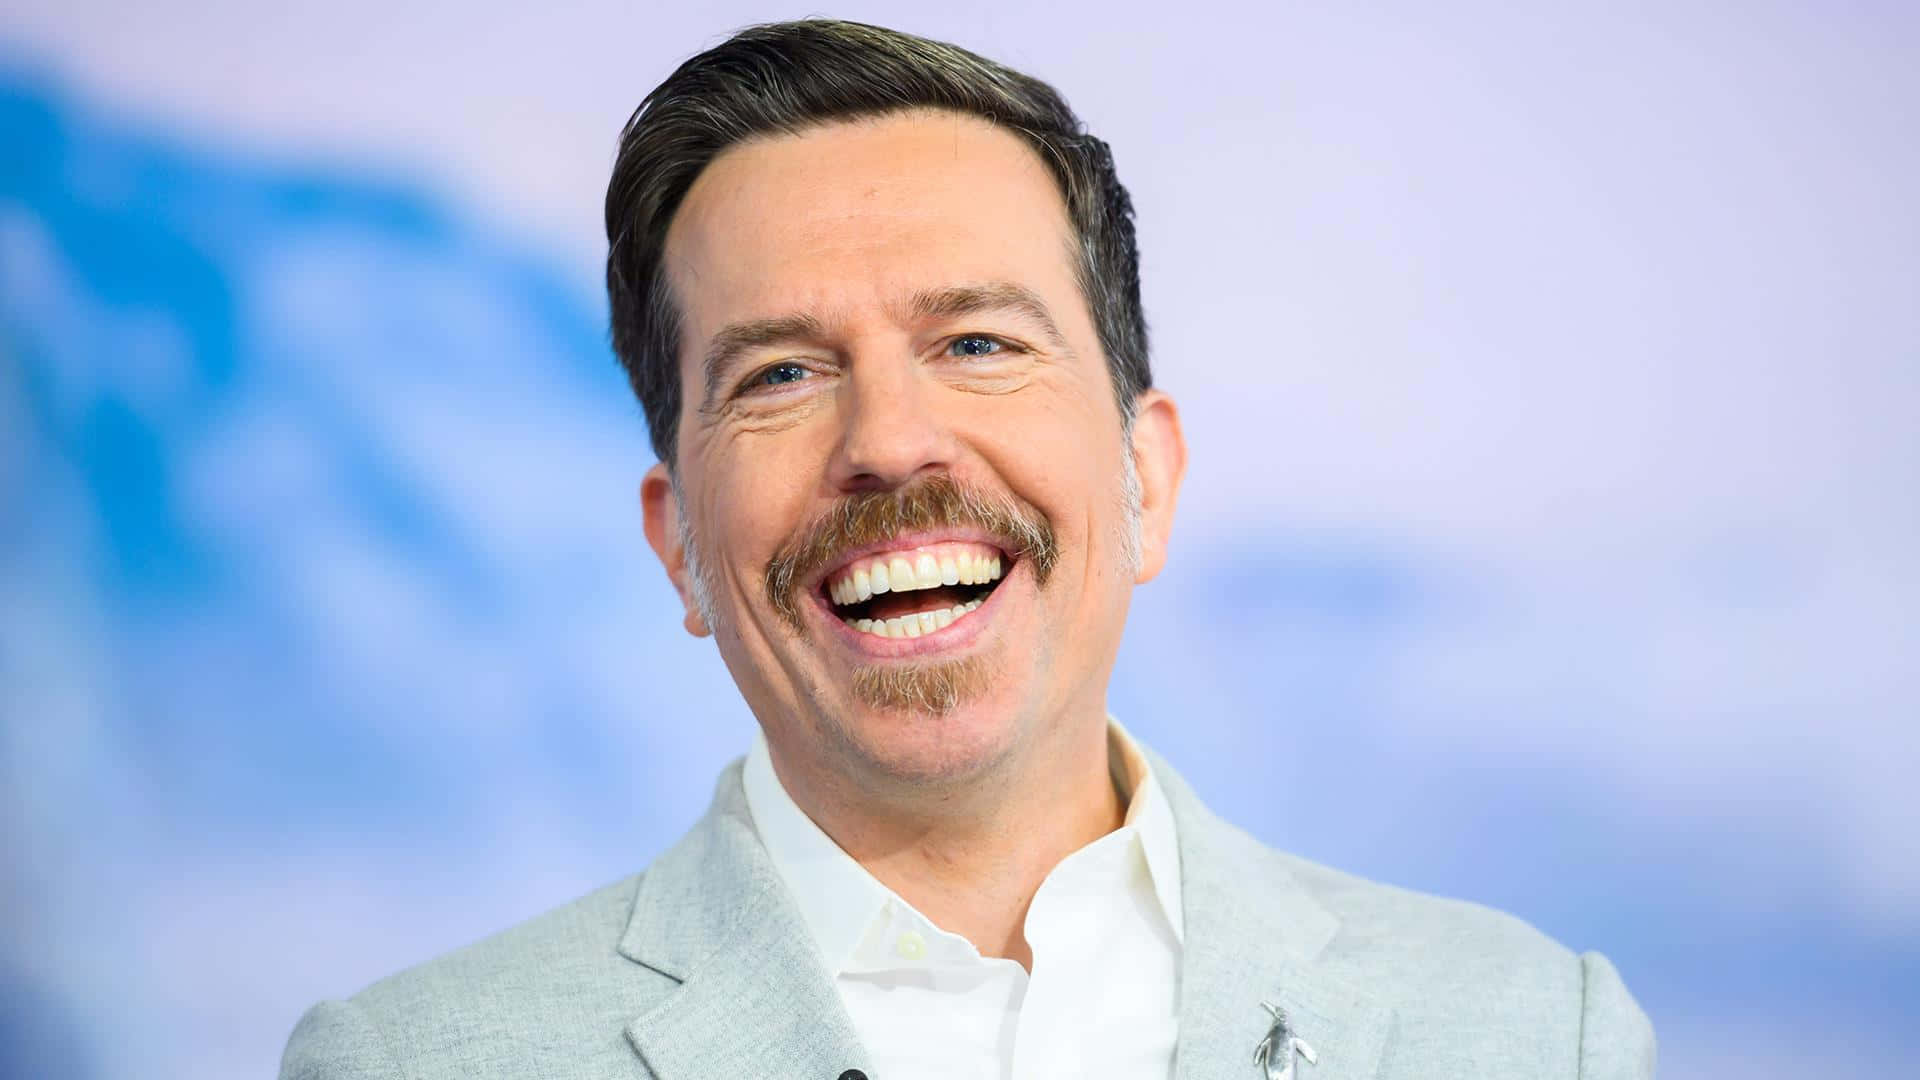 American Actor And Comedian Ed Helms